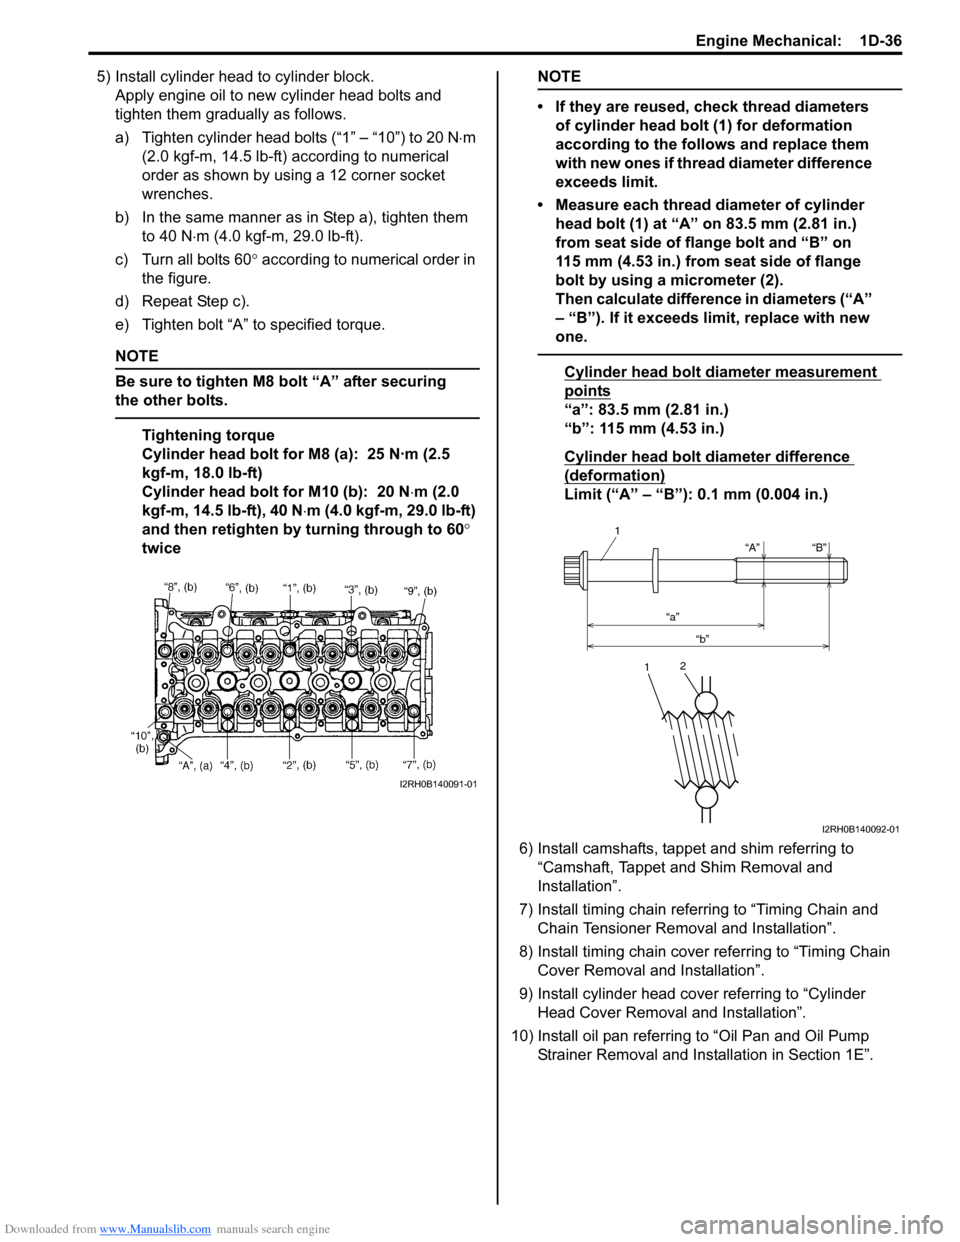 SUZUKI SWIFT 2008 2.G Service Service Manual Downloaded from www.Manualslib.com manuals search engine Engine Mechanical:  1D-36
5) Install cylinder head to cylinder block.Apply engine oil to new cylinder head bolts and 
tighten them gradually as